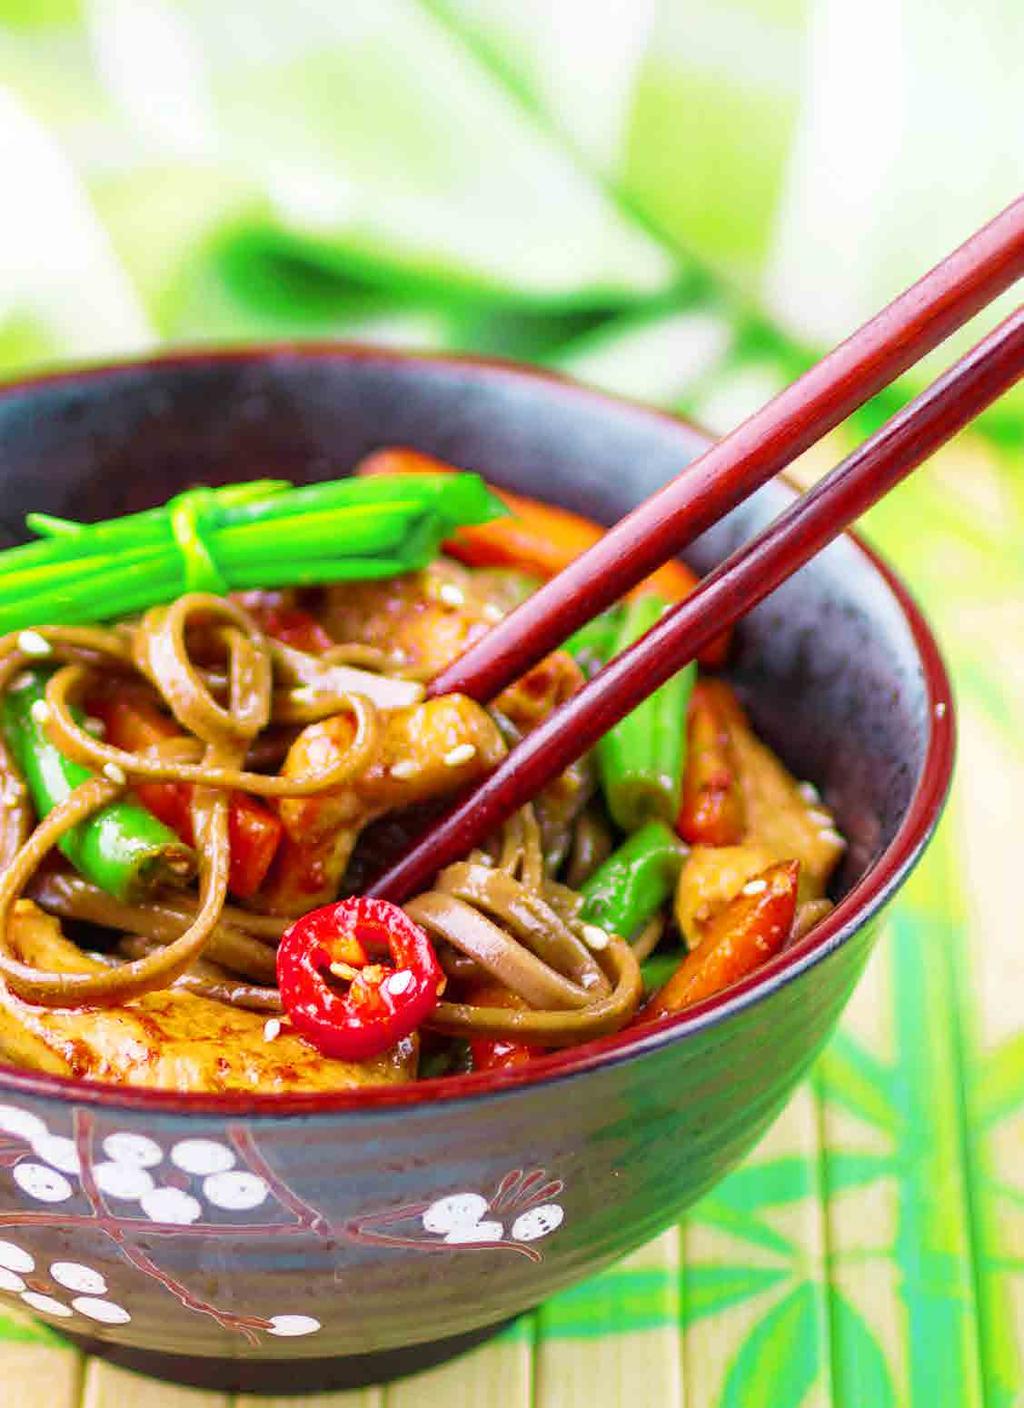 SOBA NOODLES WITH SHREDDED CHICKEN, GINGER & LIME 2 x 150g chicken breast fillets 90g soba noodles 1cm fresh ginger, finely chopped 1 carrot, cut into matchsticks 1 red capsicum, thinly sliced 1 long